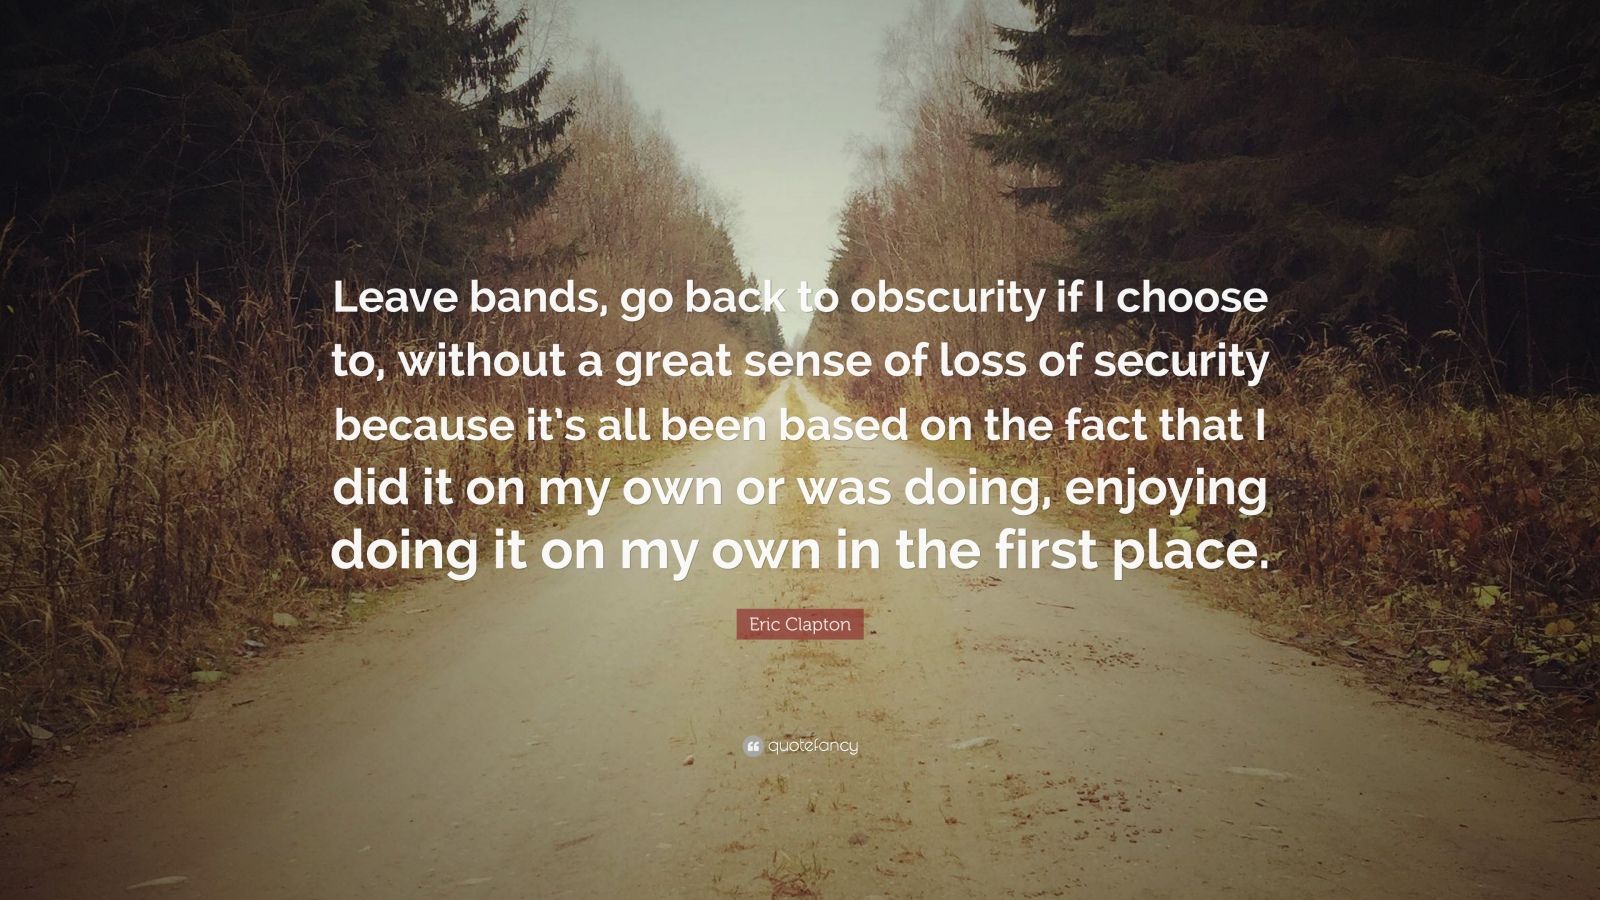 Eric Clapton Quote: "Leave bands, go back to obscurity if ...